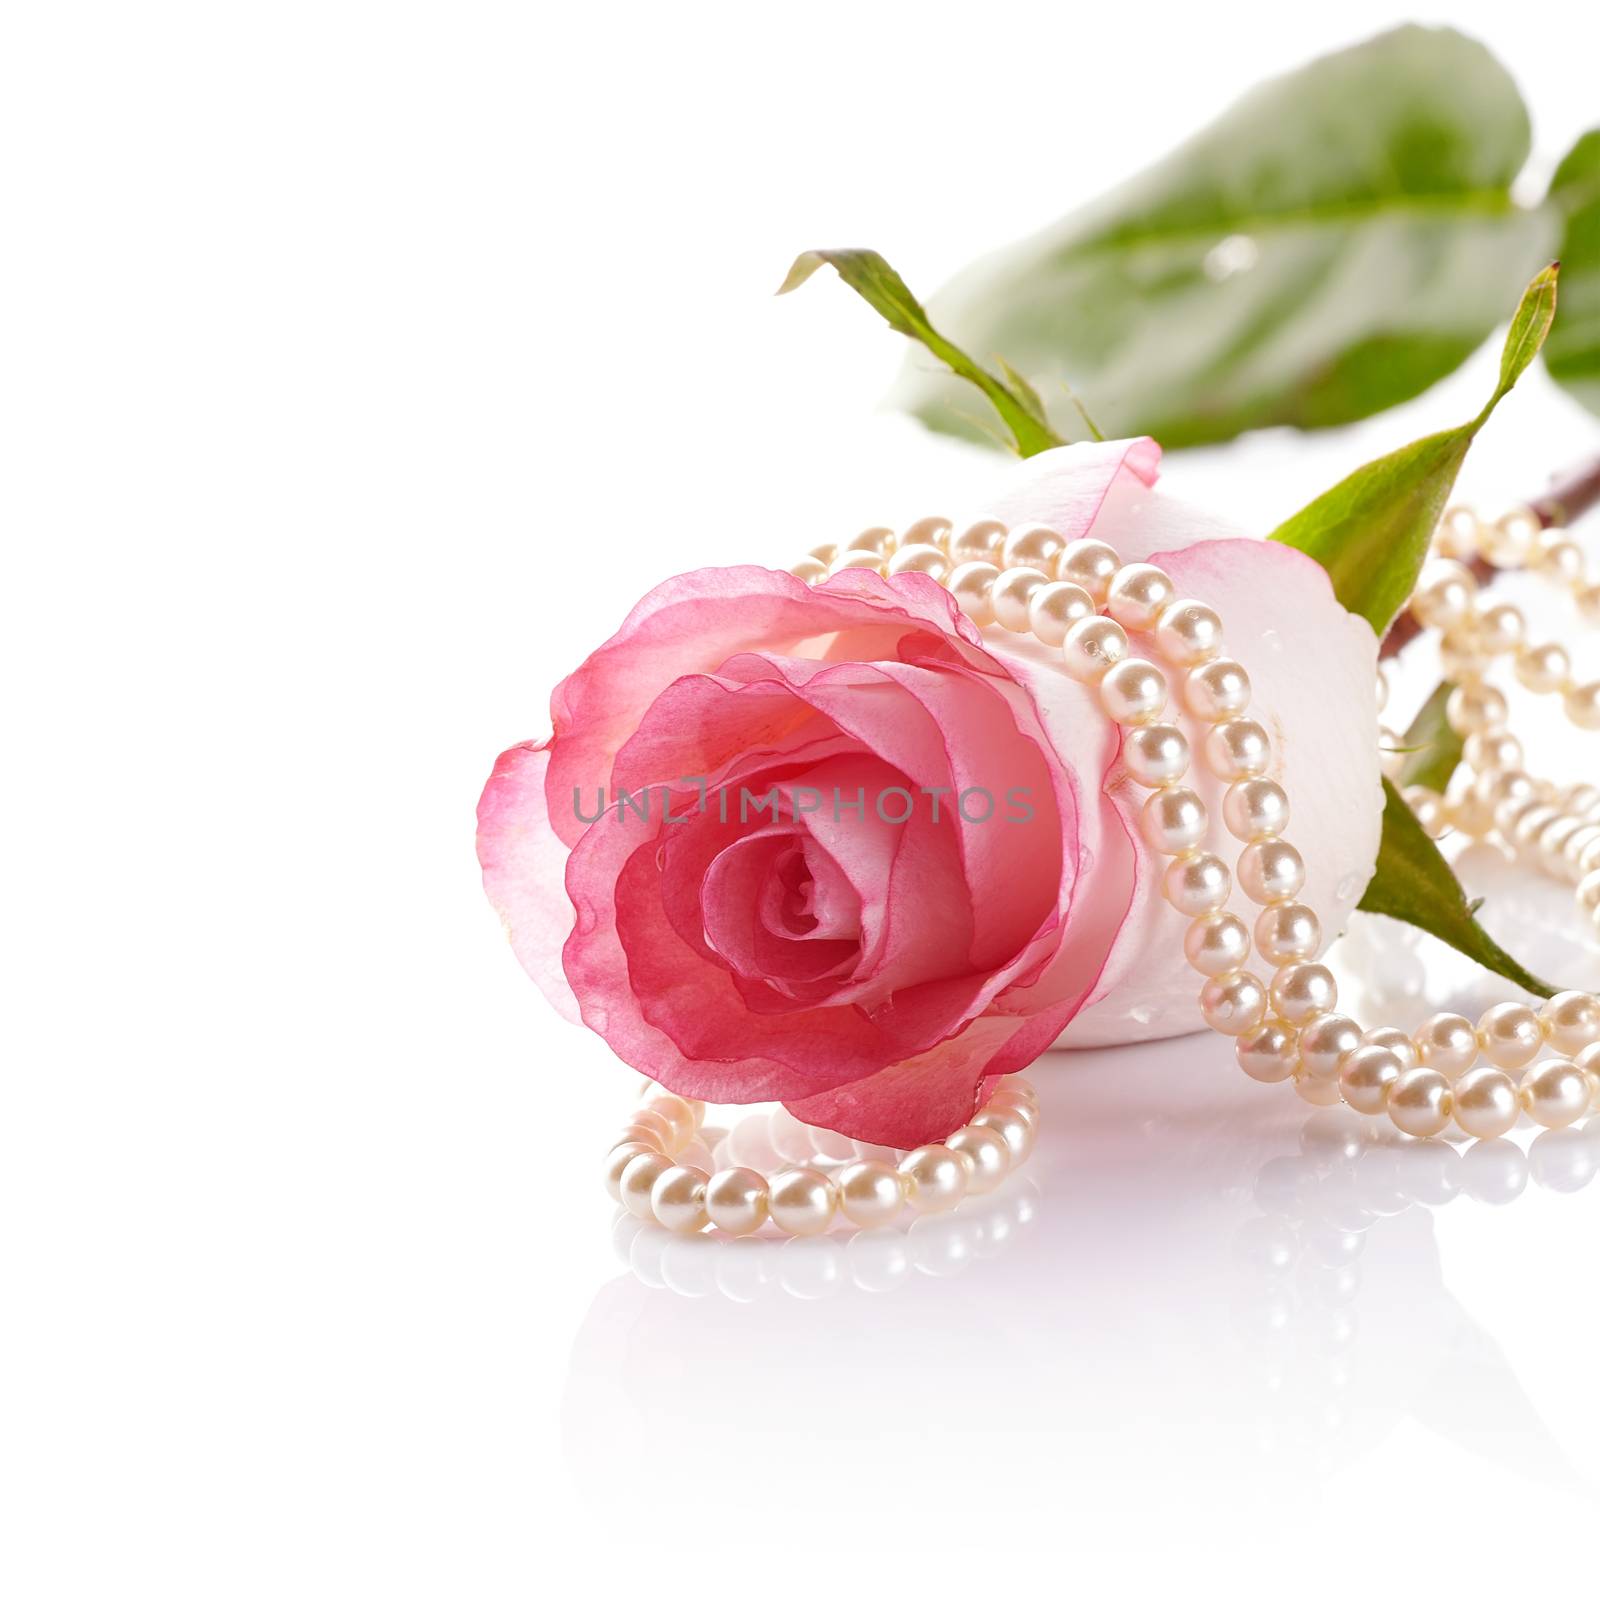 Pink rose. Rose on a white background. Pink flower. Pink rose and pearl beads.